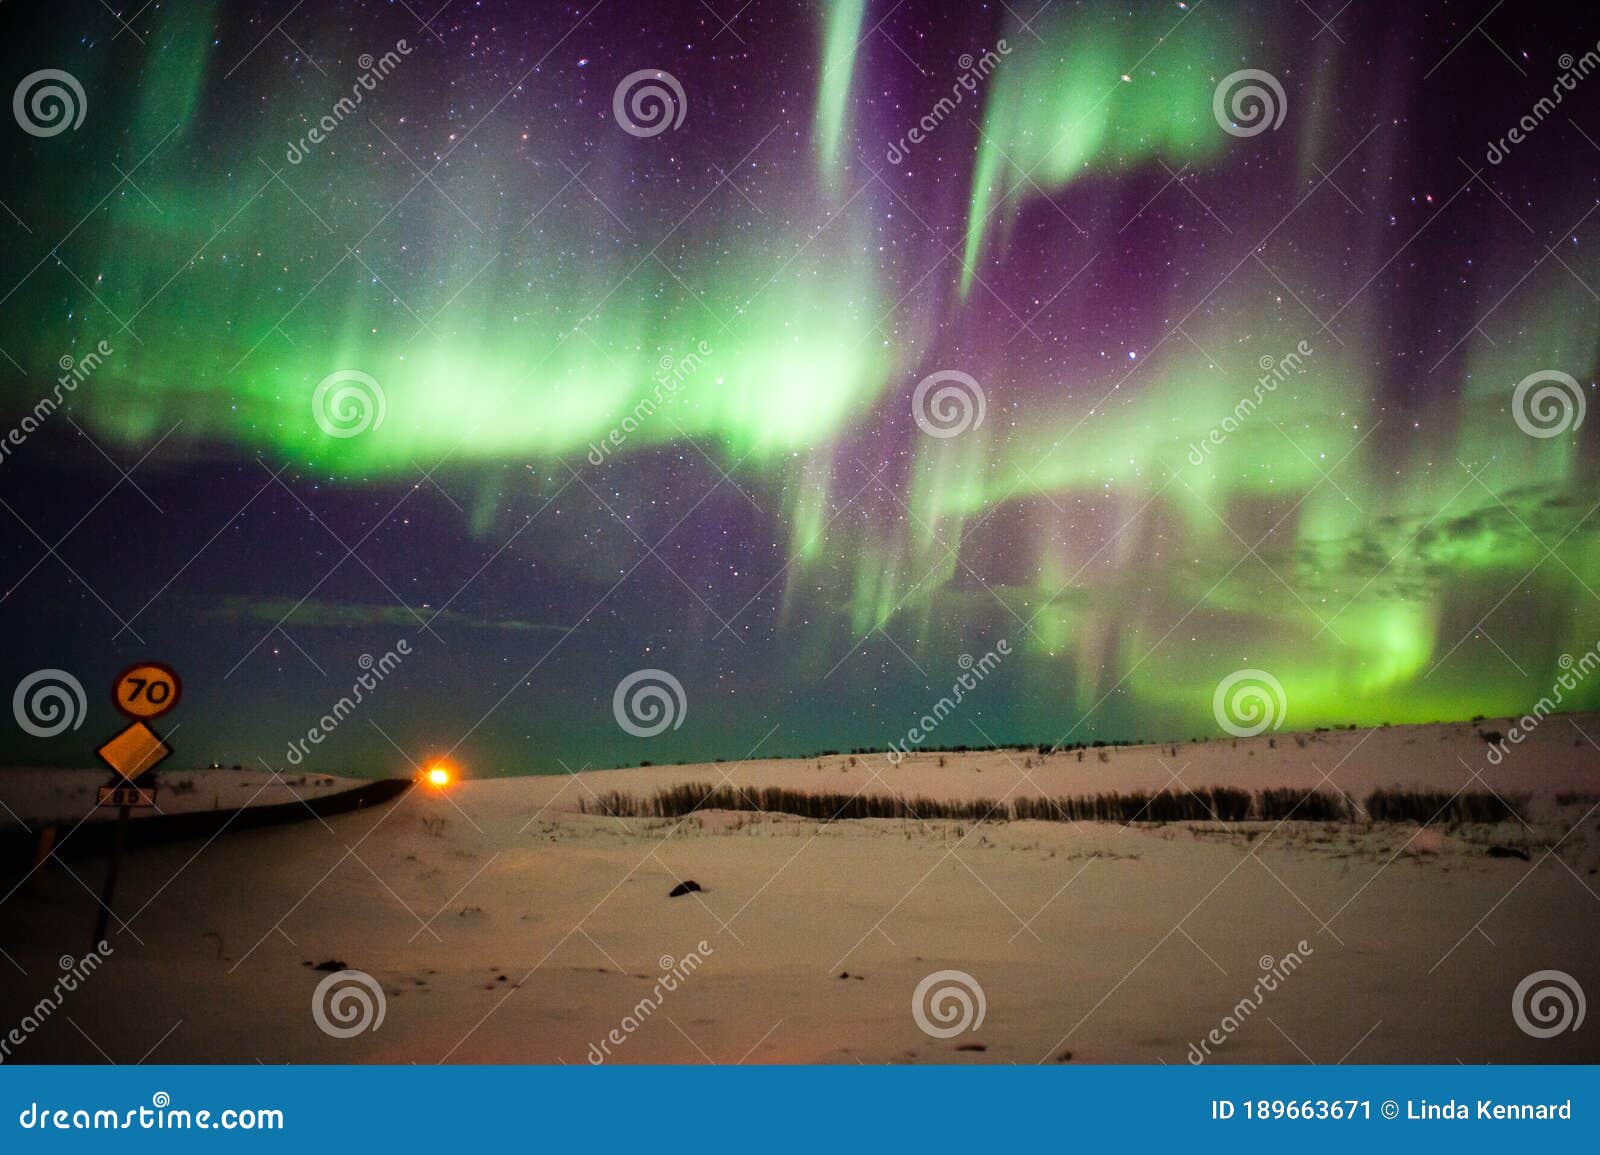 Northern Lights Aurora Borealis Iceland Dramatic Skyshow With Rippling Curtains Of Green And Purple Light Stock Image Image Of Dramatic Astronomy